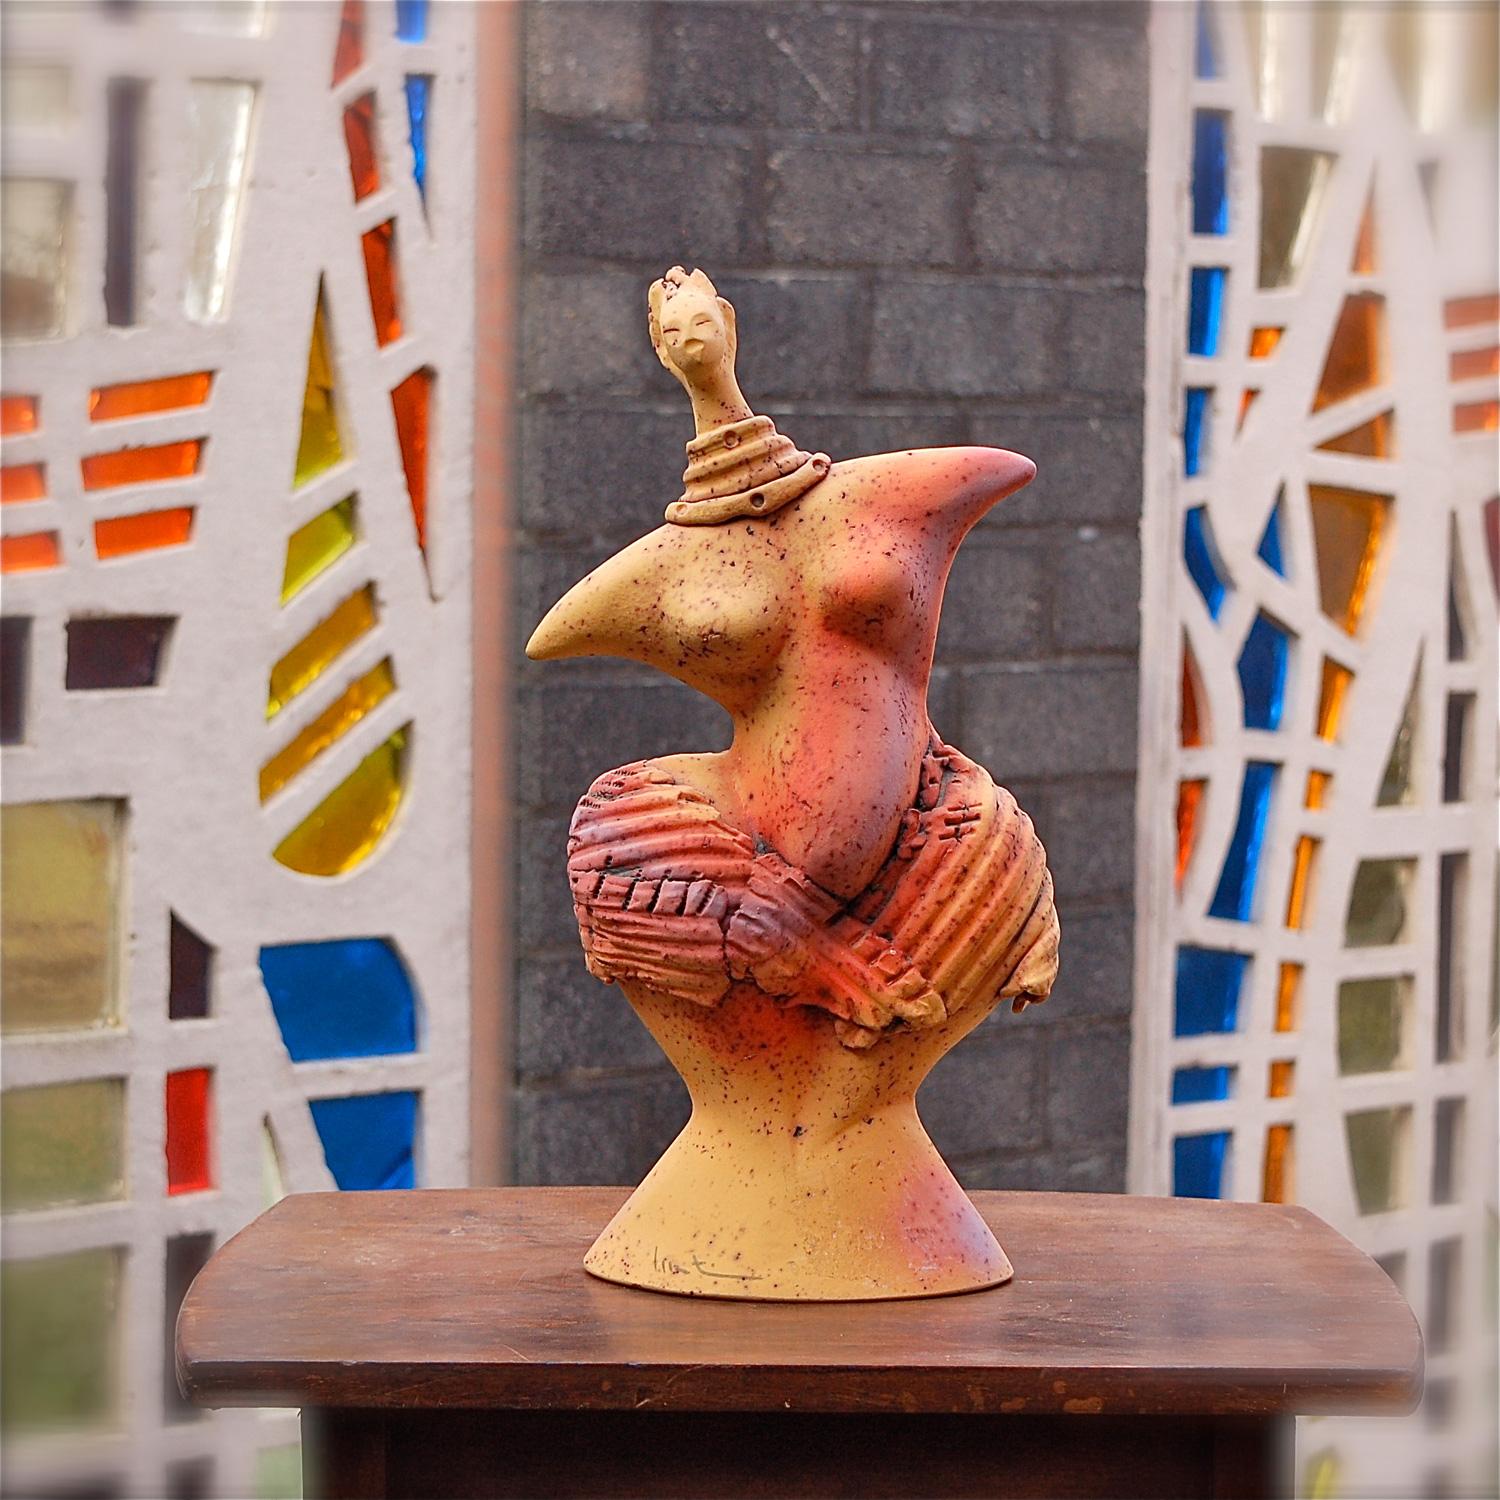 Expressive and colourful sculpture of a female figure, possibly a fertility statue. The imagery and style date it to the 1980s. The figure is made from earthenware, coloured in bright yellow, orange and purple with a textured surface that is still